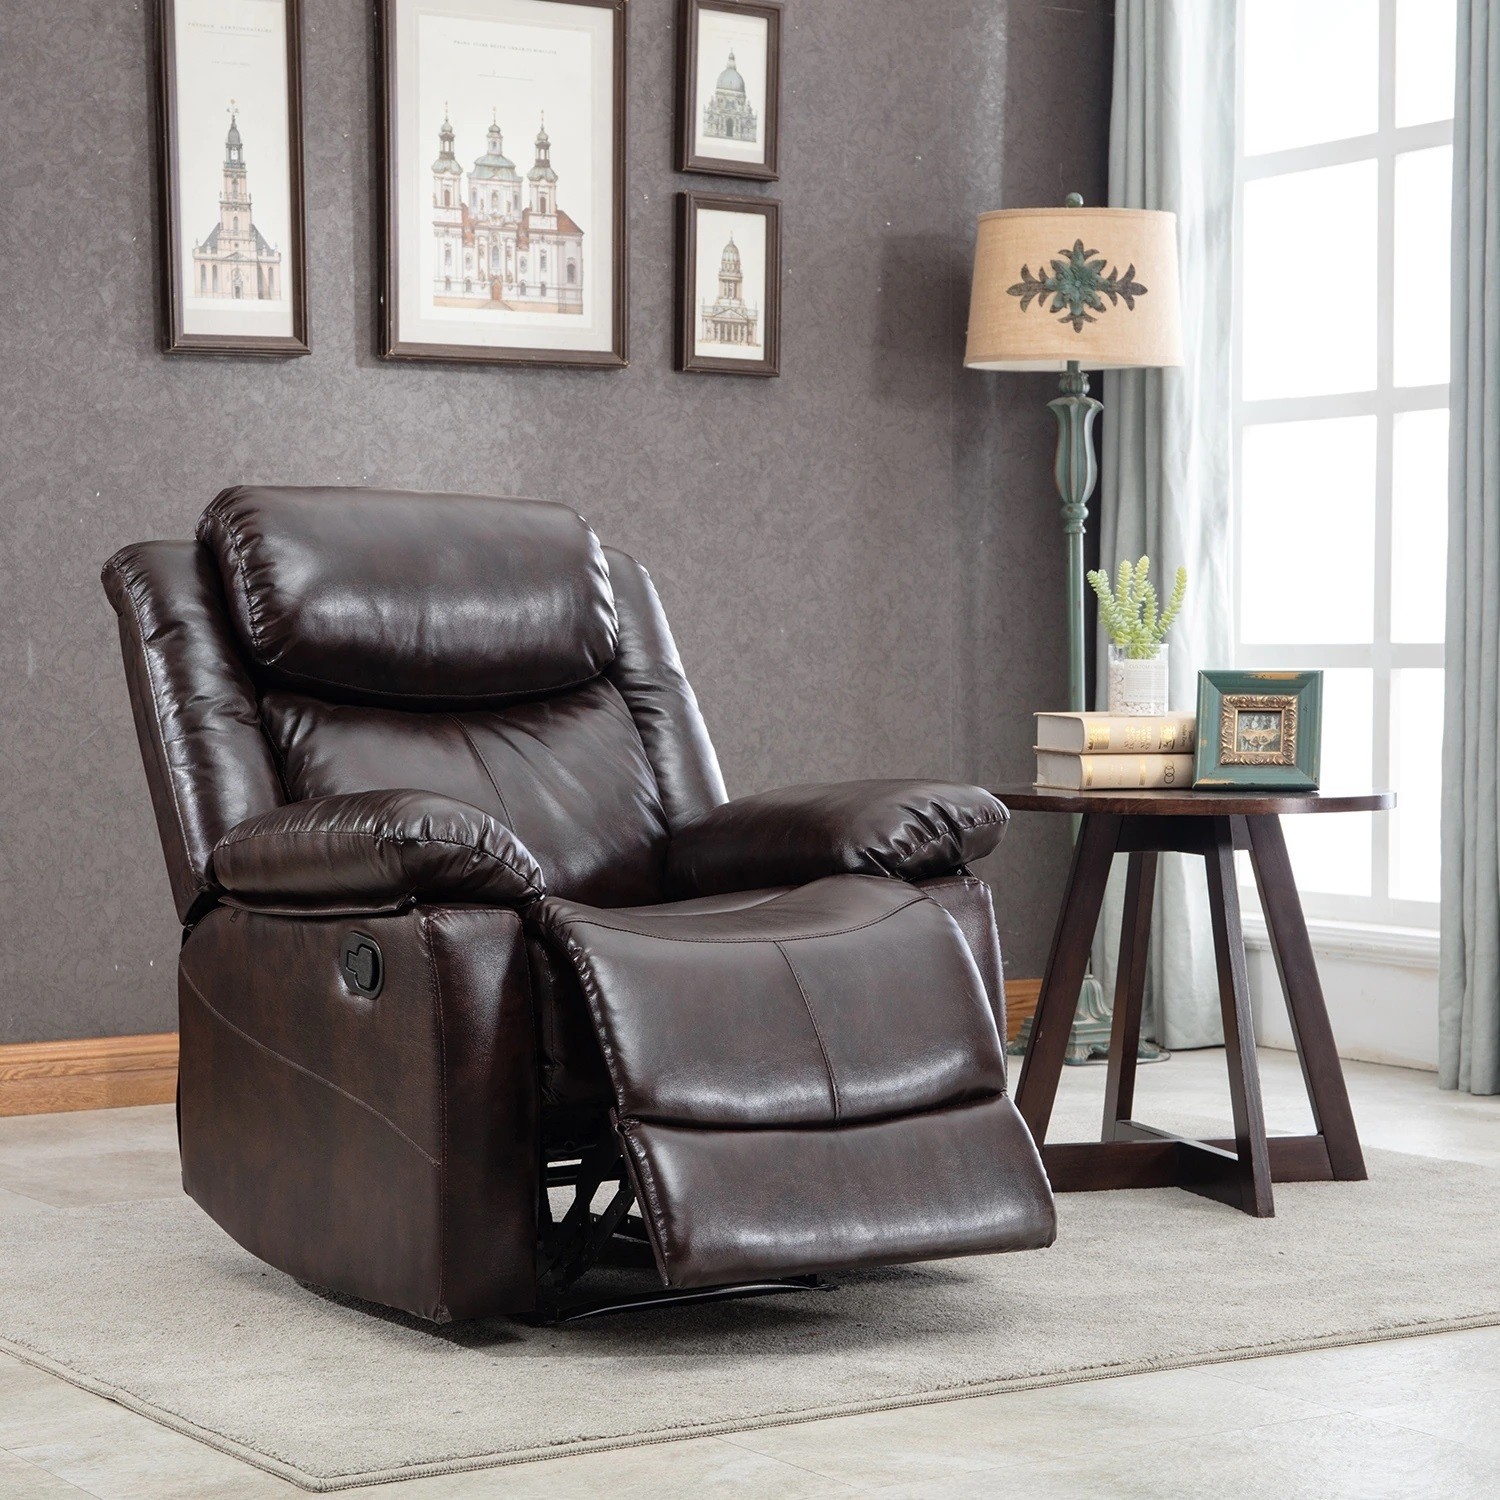 Sofa Style Reclining Chair